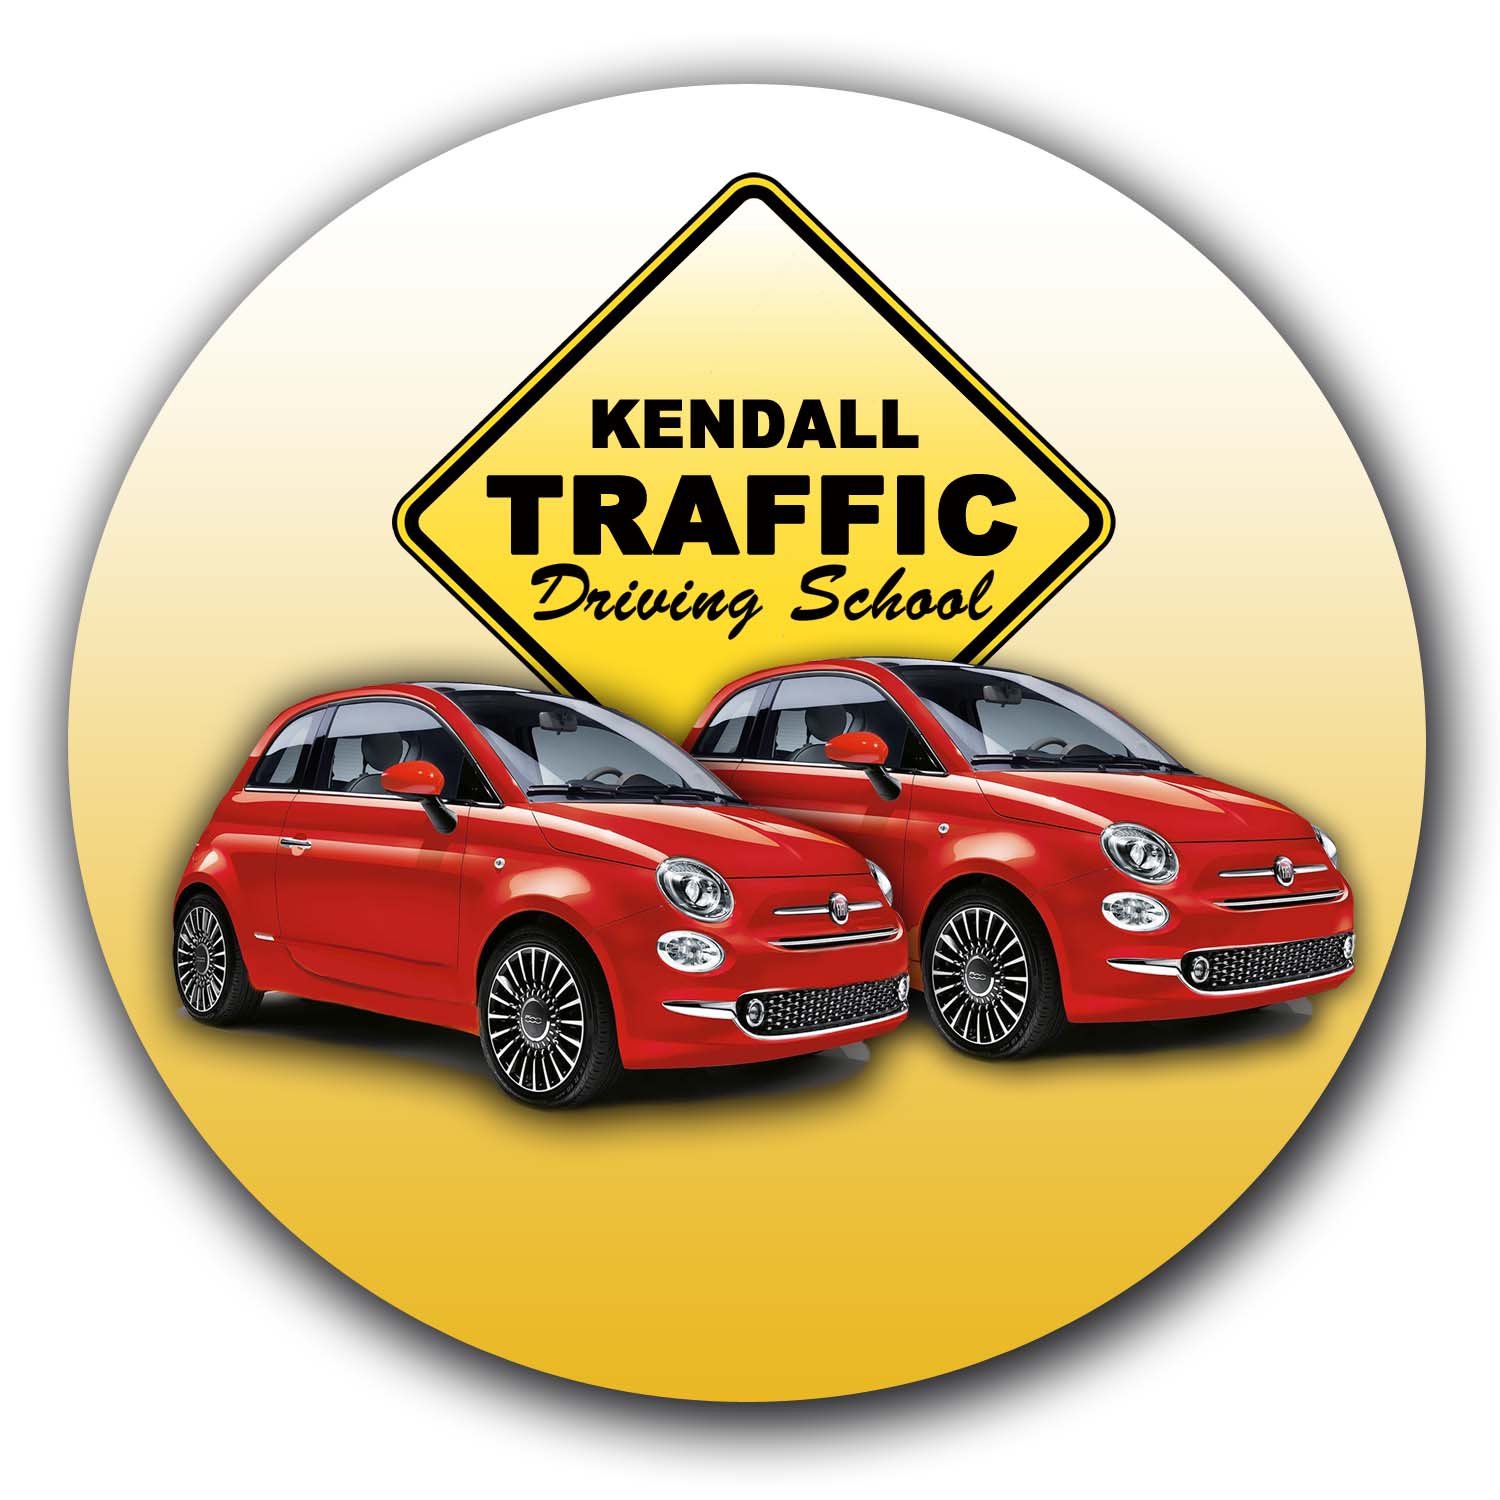 Kendall Traffic and Driving School